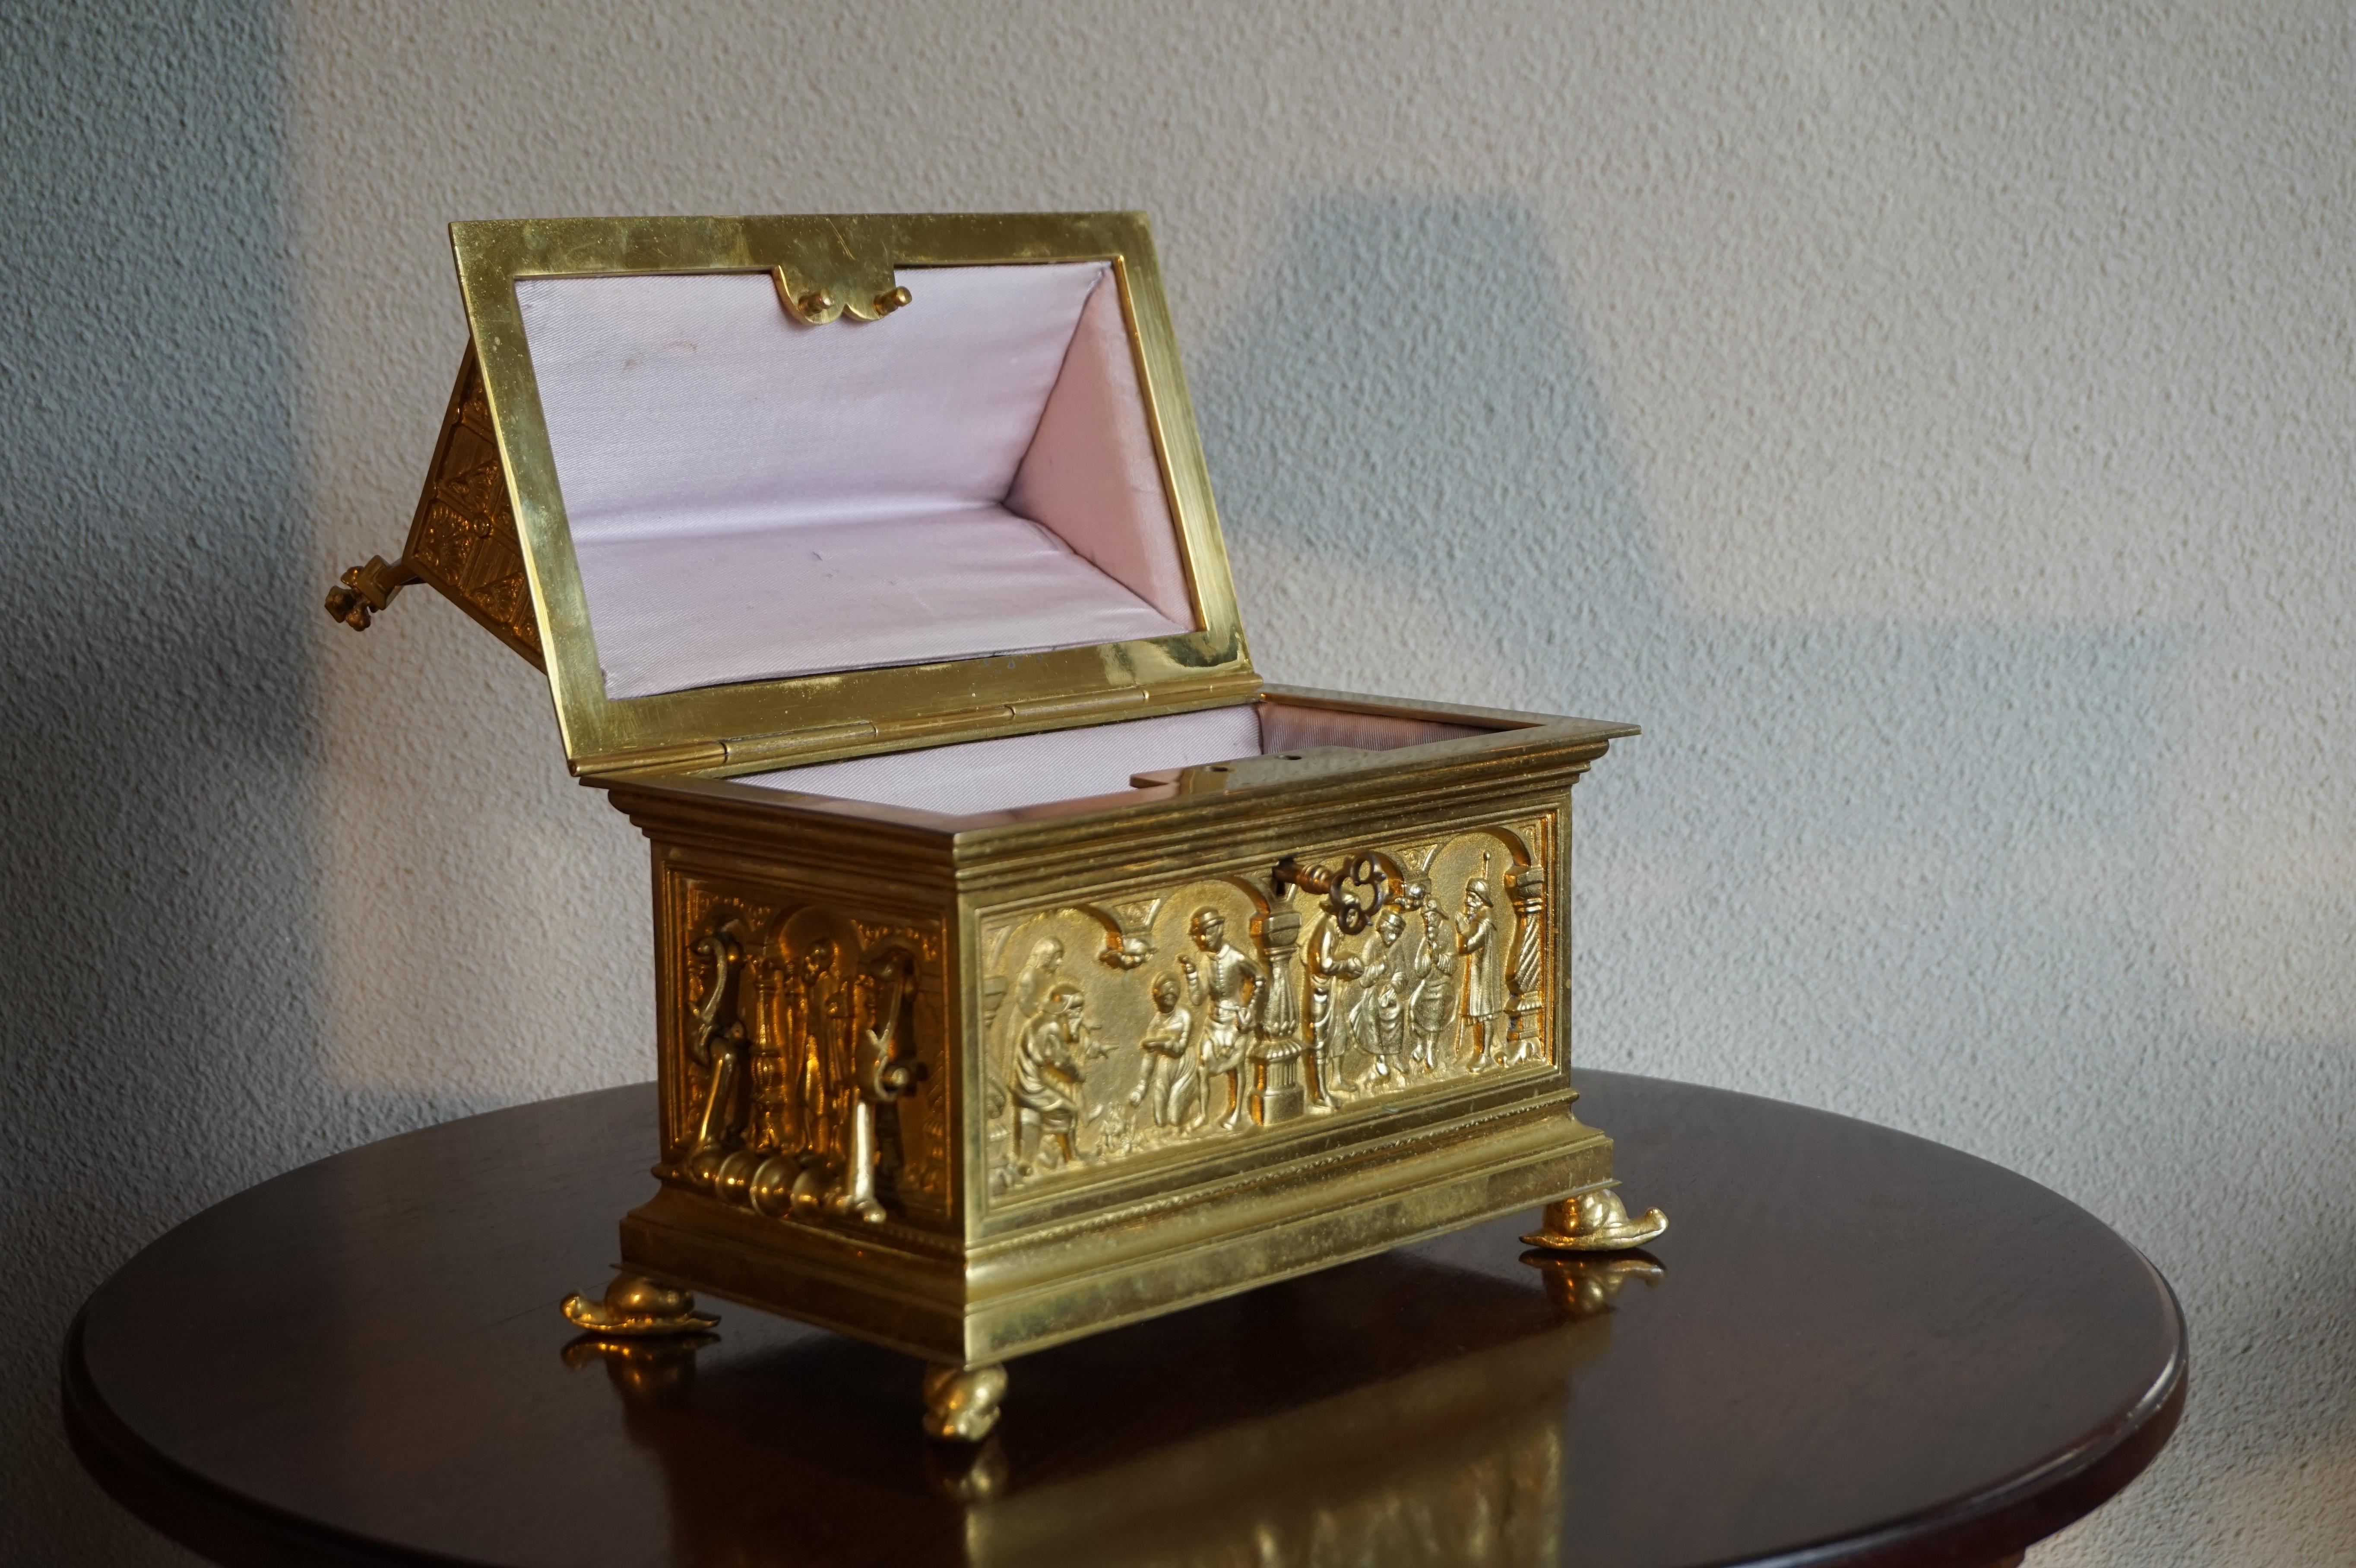 Antique & Stylish Gothic Revival Gilt Bronze & Brass Church Relic or Jewelry Box 8